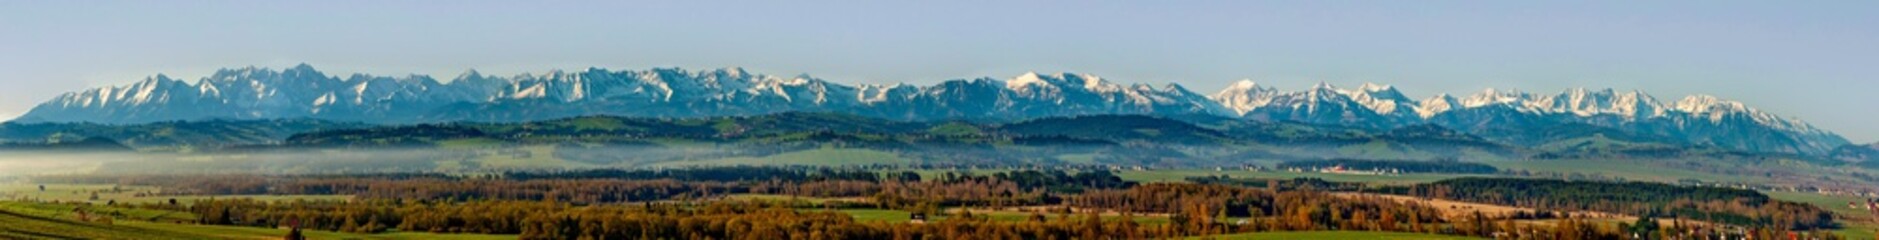 Extra wide panorama of the Tatra Mountains with forests, hills and meadows in Podhale region in Poland. Early morning in spring, morning fog, sunrise light